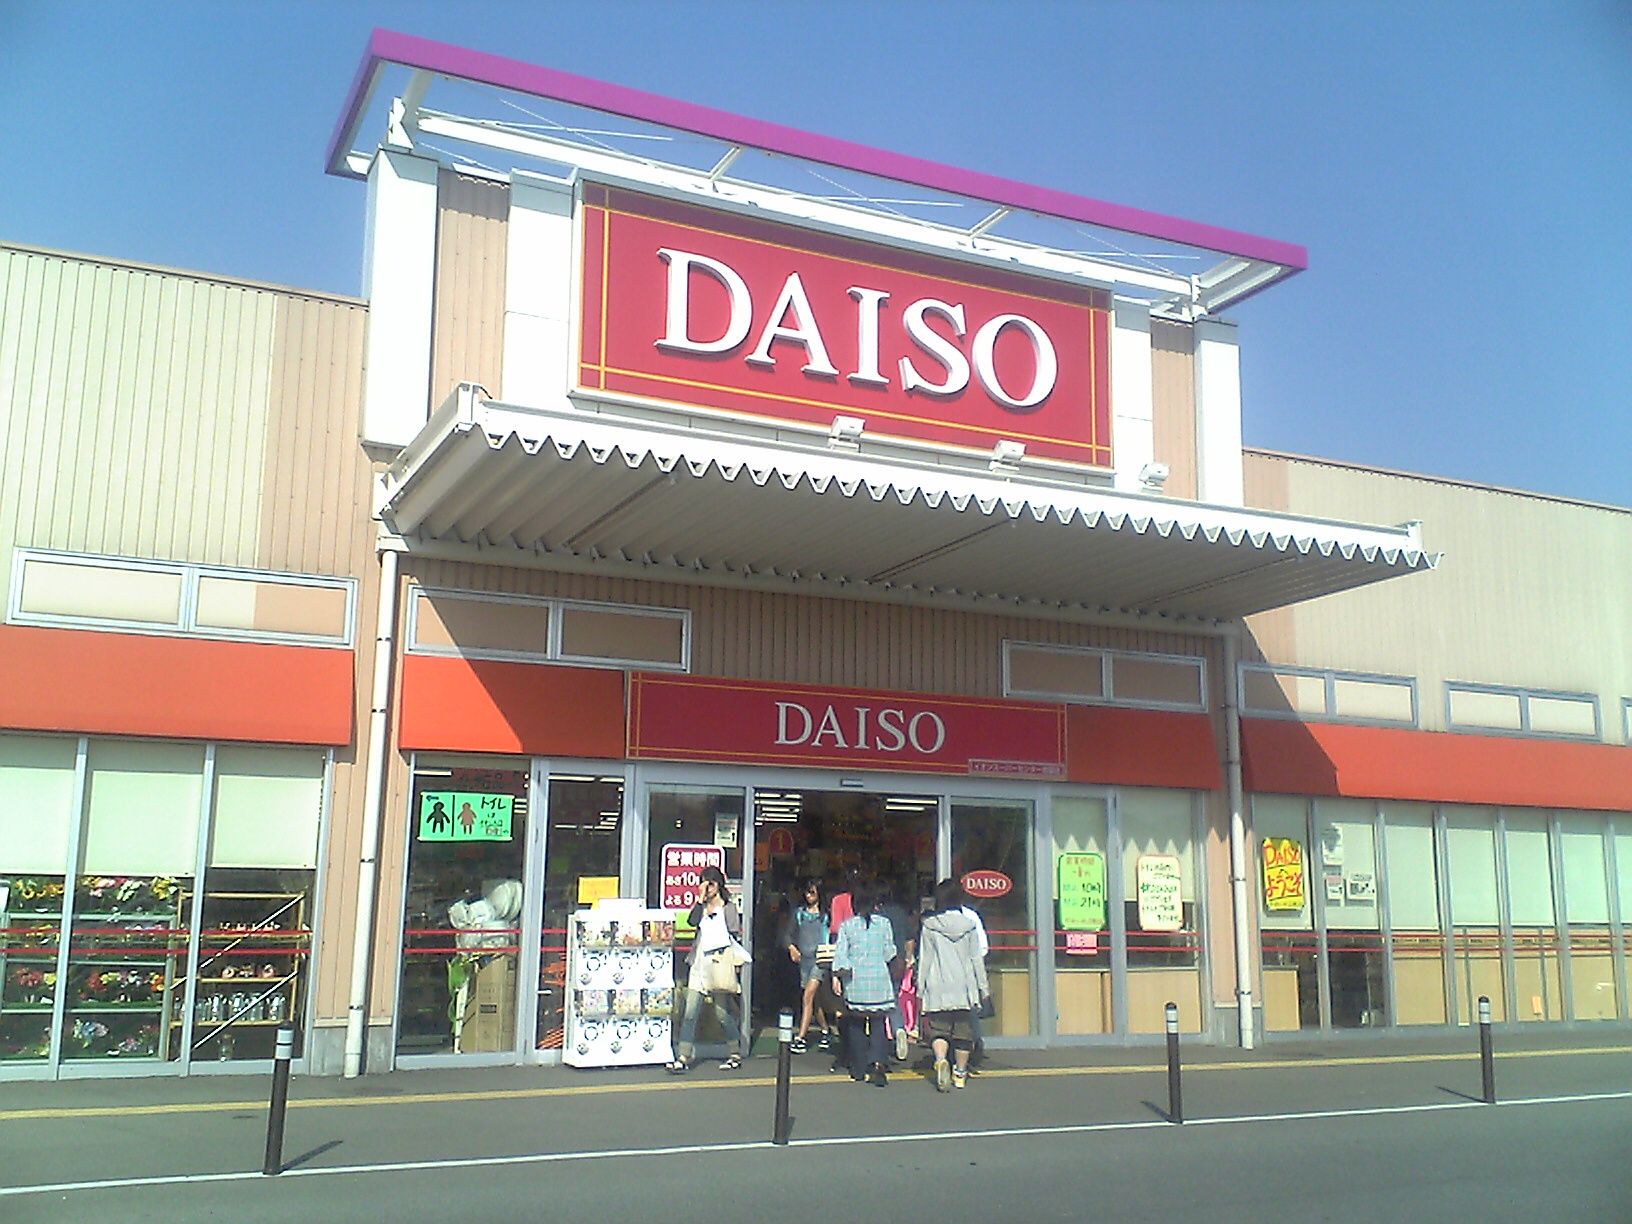 Japan's largest ¥100 discount store Daiso besieged by sinking yen